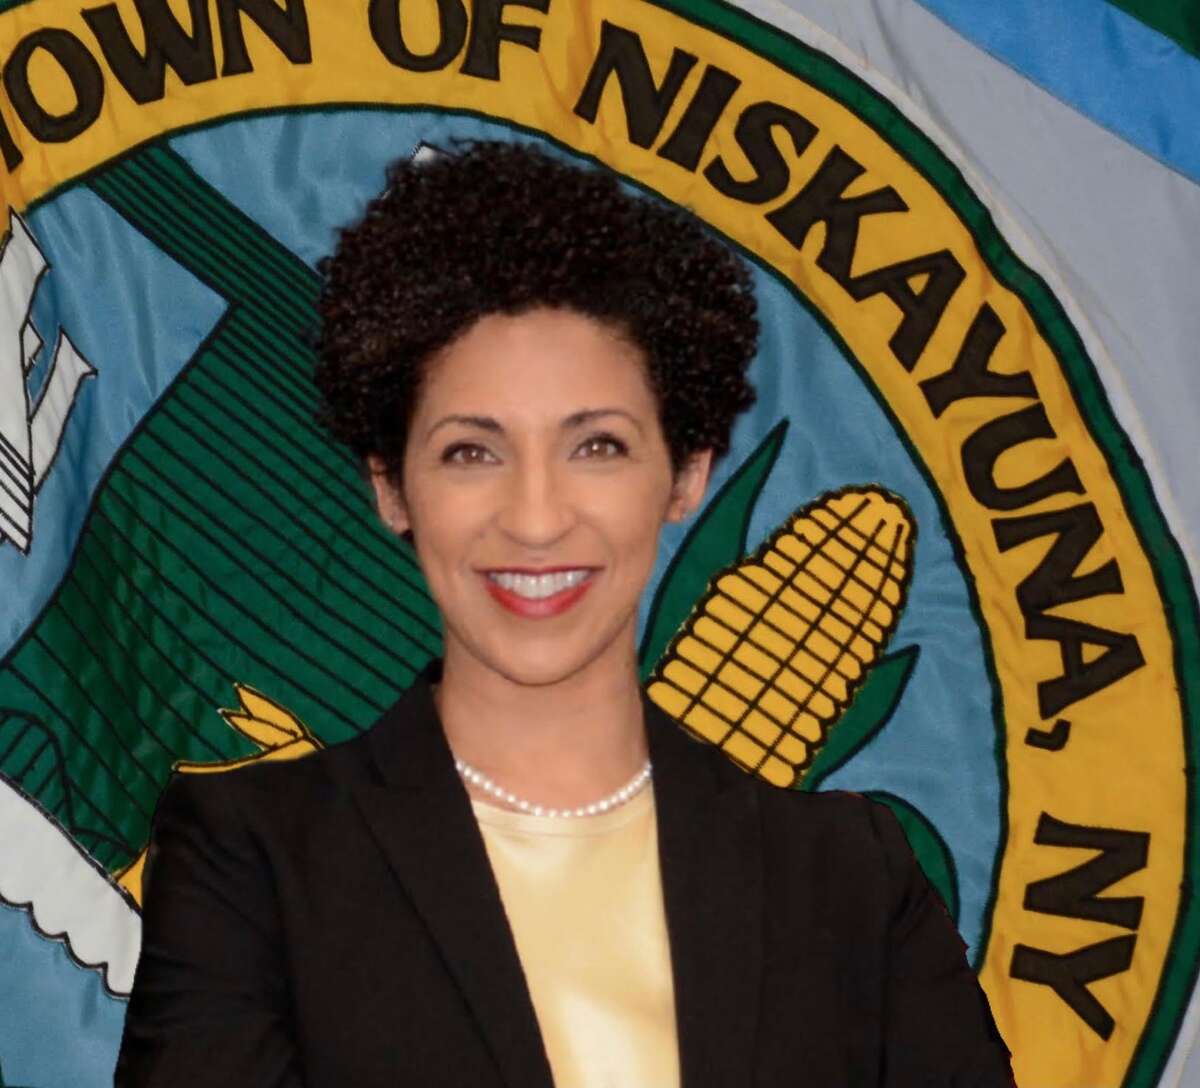 Jaime Lynn Puccioni is Niskayuna's new town supervisor in 2022, and is making some staffing changes.